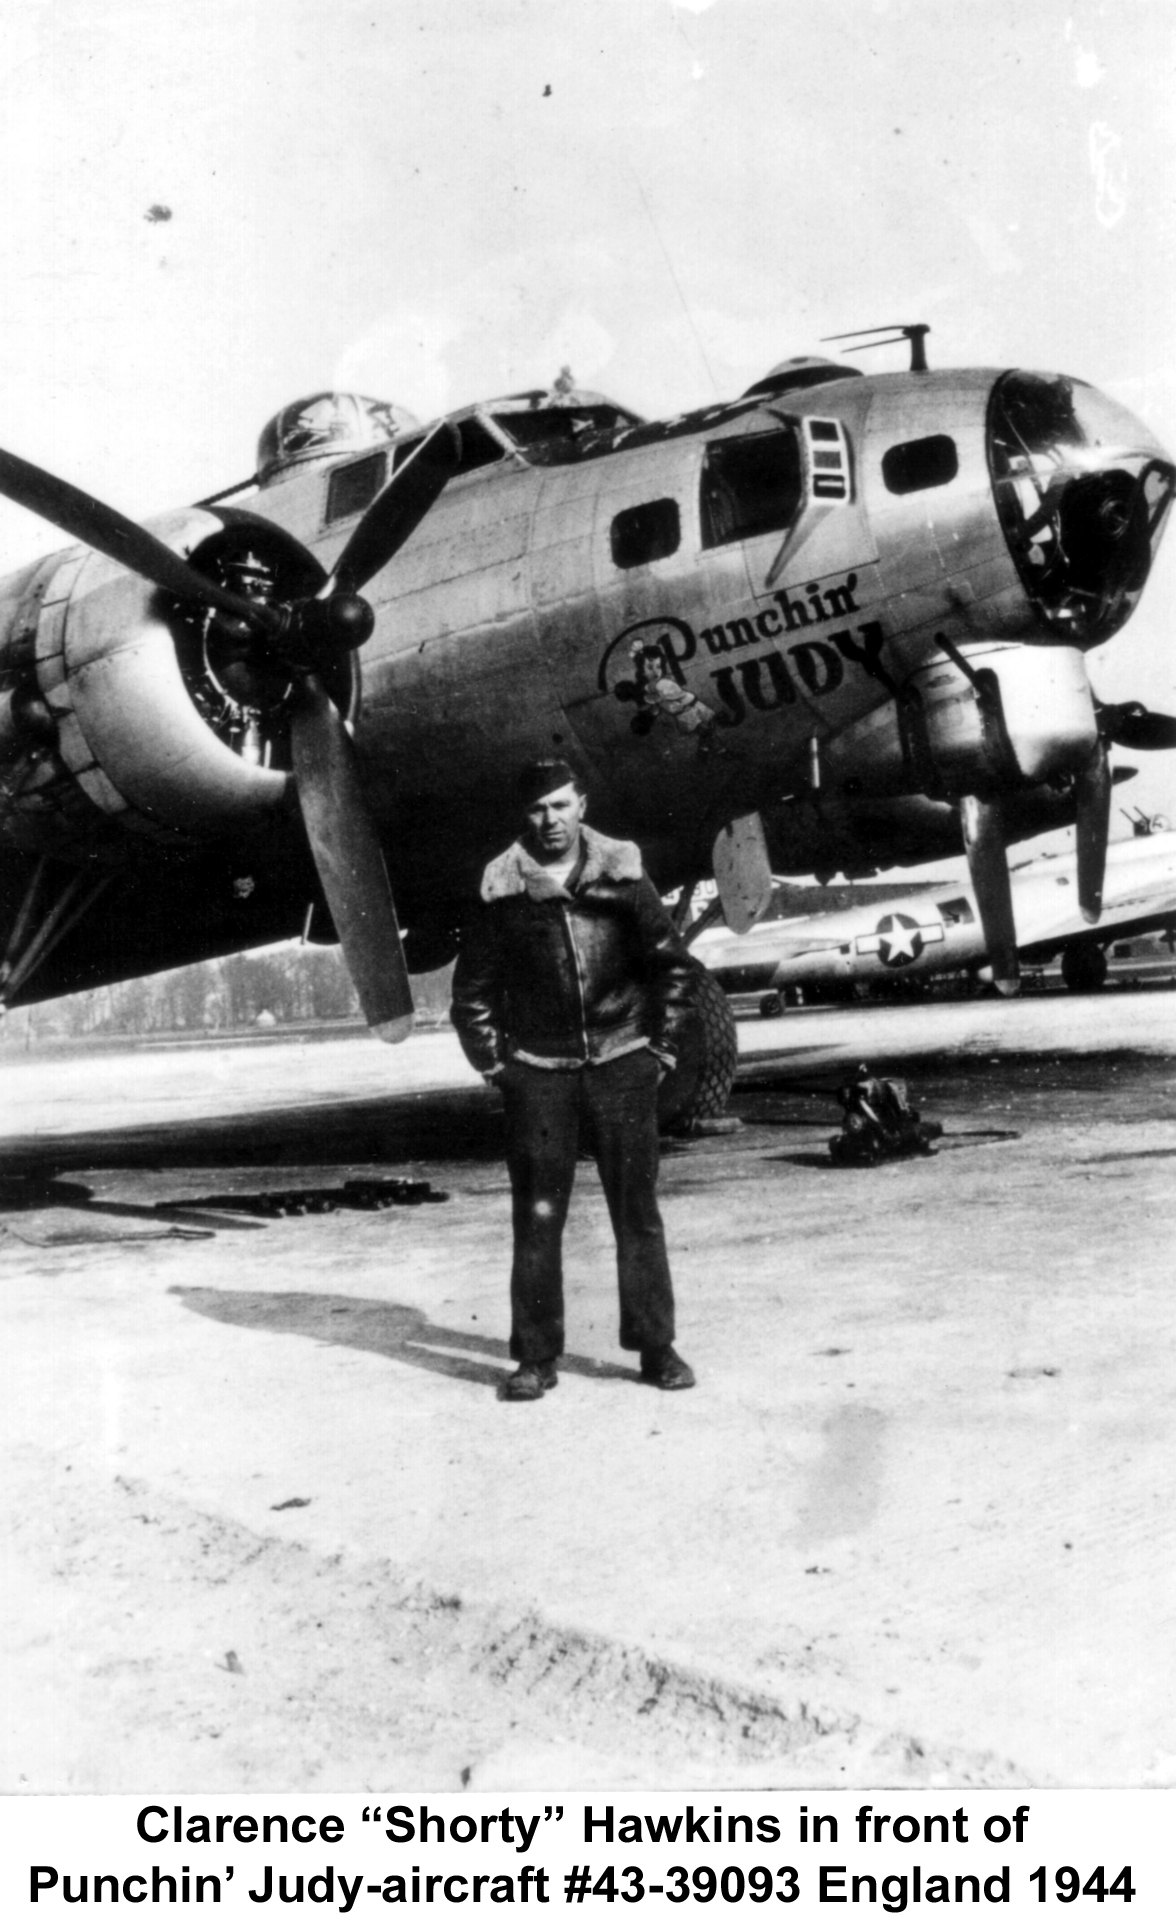 Photo taken of Clarence "Shorty" Hawkins in front of aircraft #43-39093 at Army Airforce Base in Knetteshall England 1944, 388th Heavy Bombardment Group H.
This aircraft survived the war and was flown back to the states where it was sold for scrap.